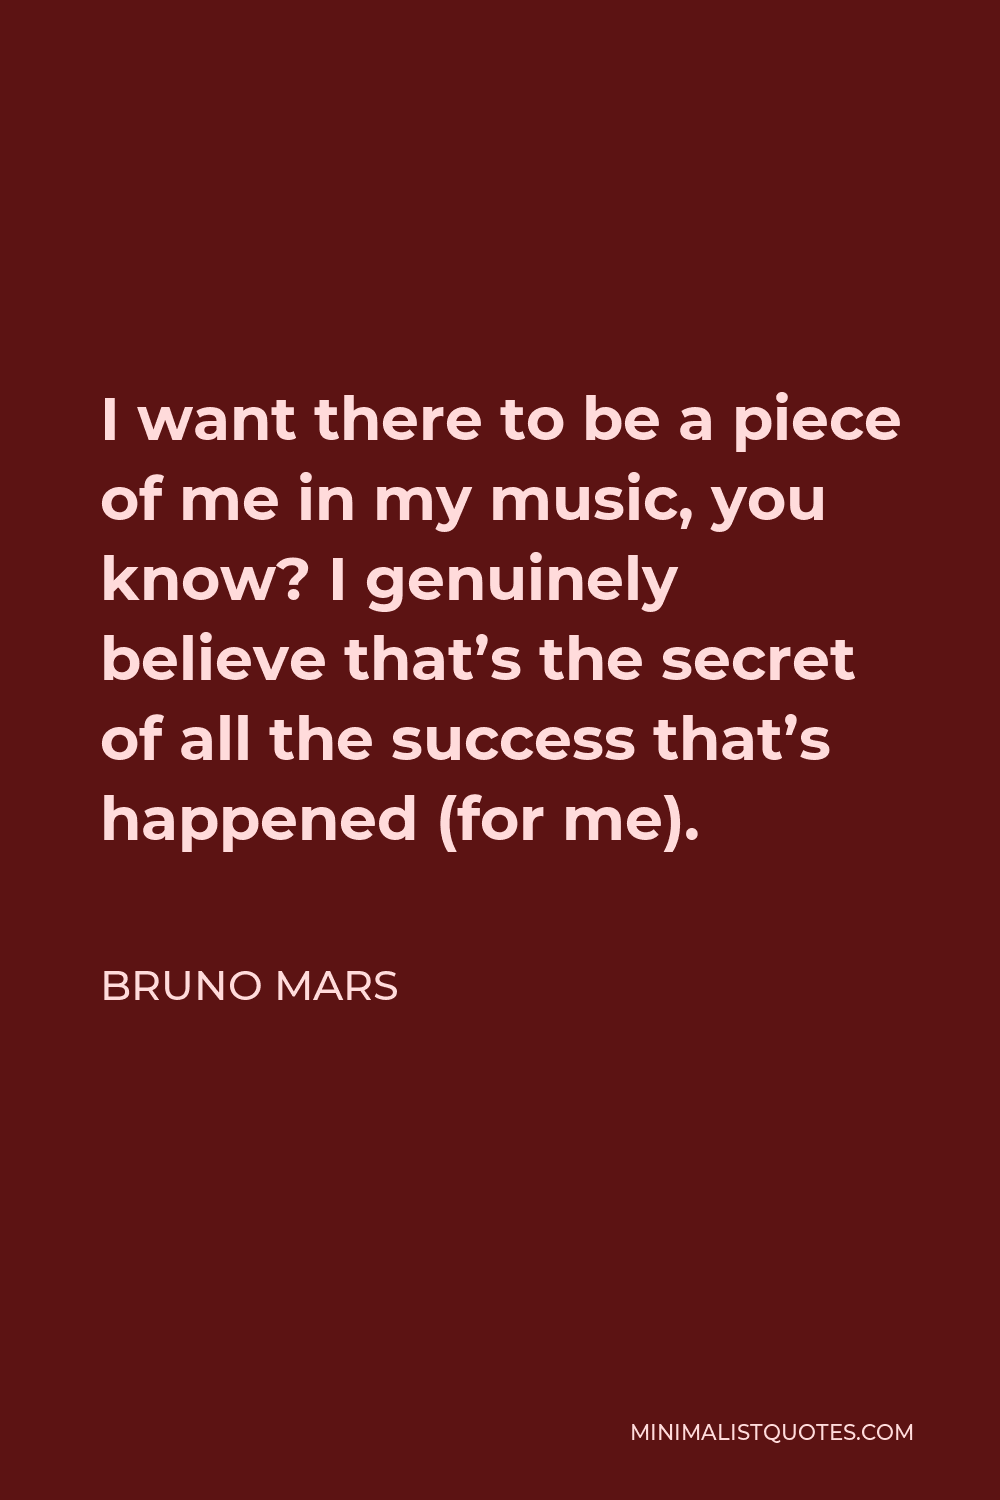 Bruno Mars Quote - I want there to be a piece of me in my music, you know? I genuinely believe that’s the secret of all the success that’s happened (for me).